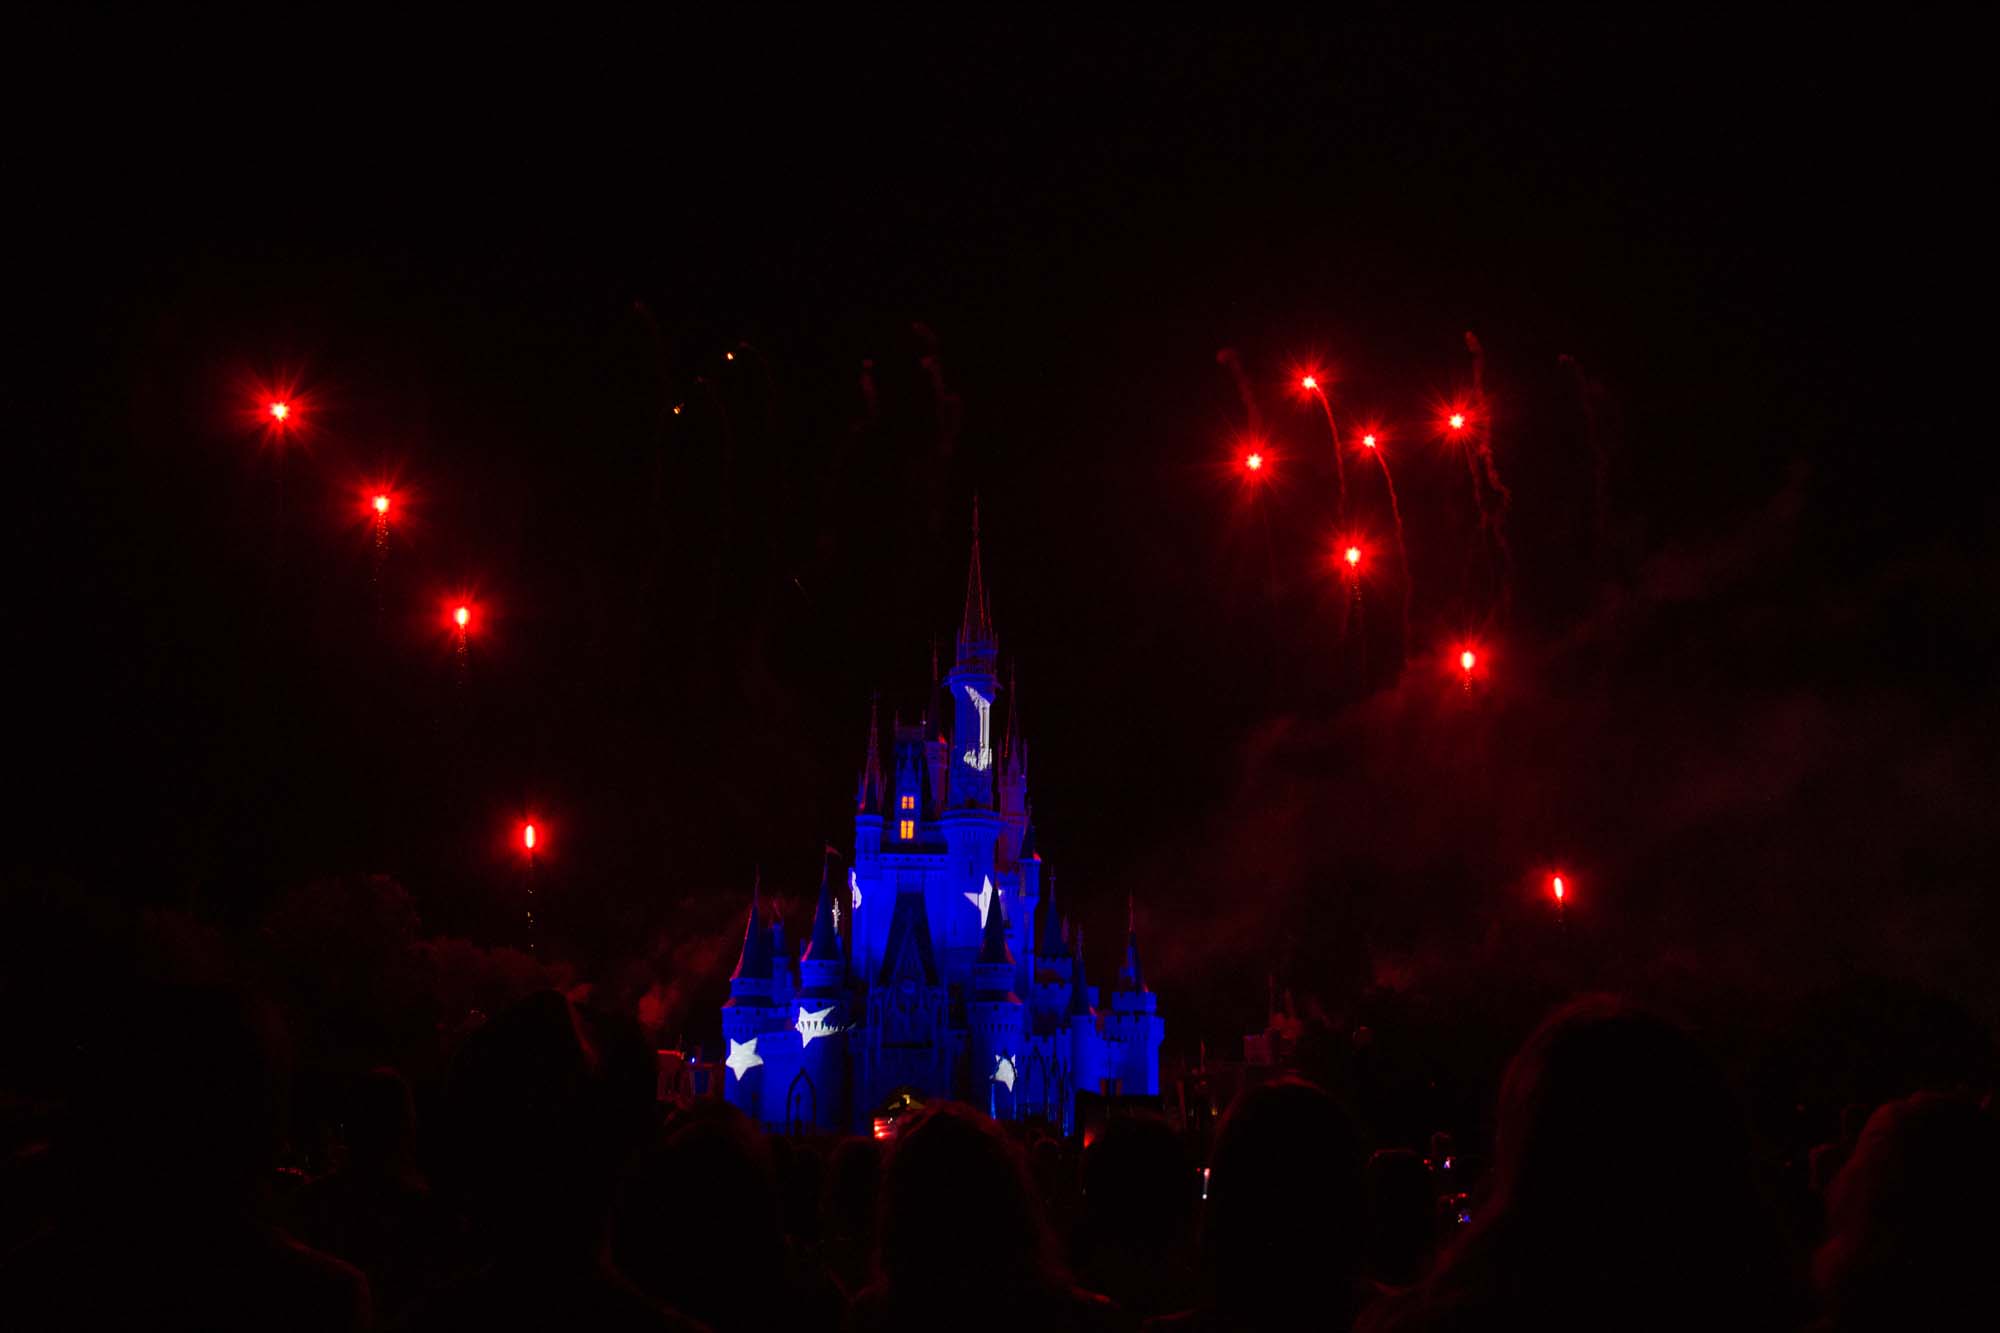 Wishes - Red Fireworks over Star Covered Castle